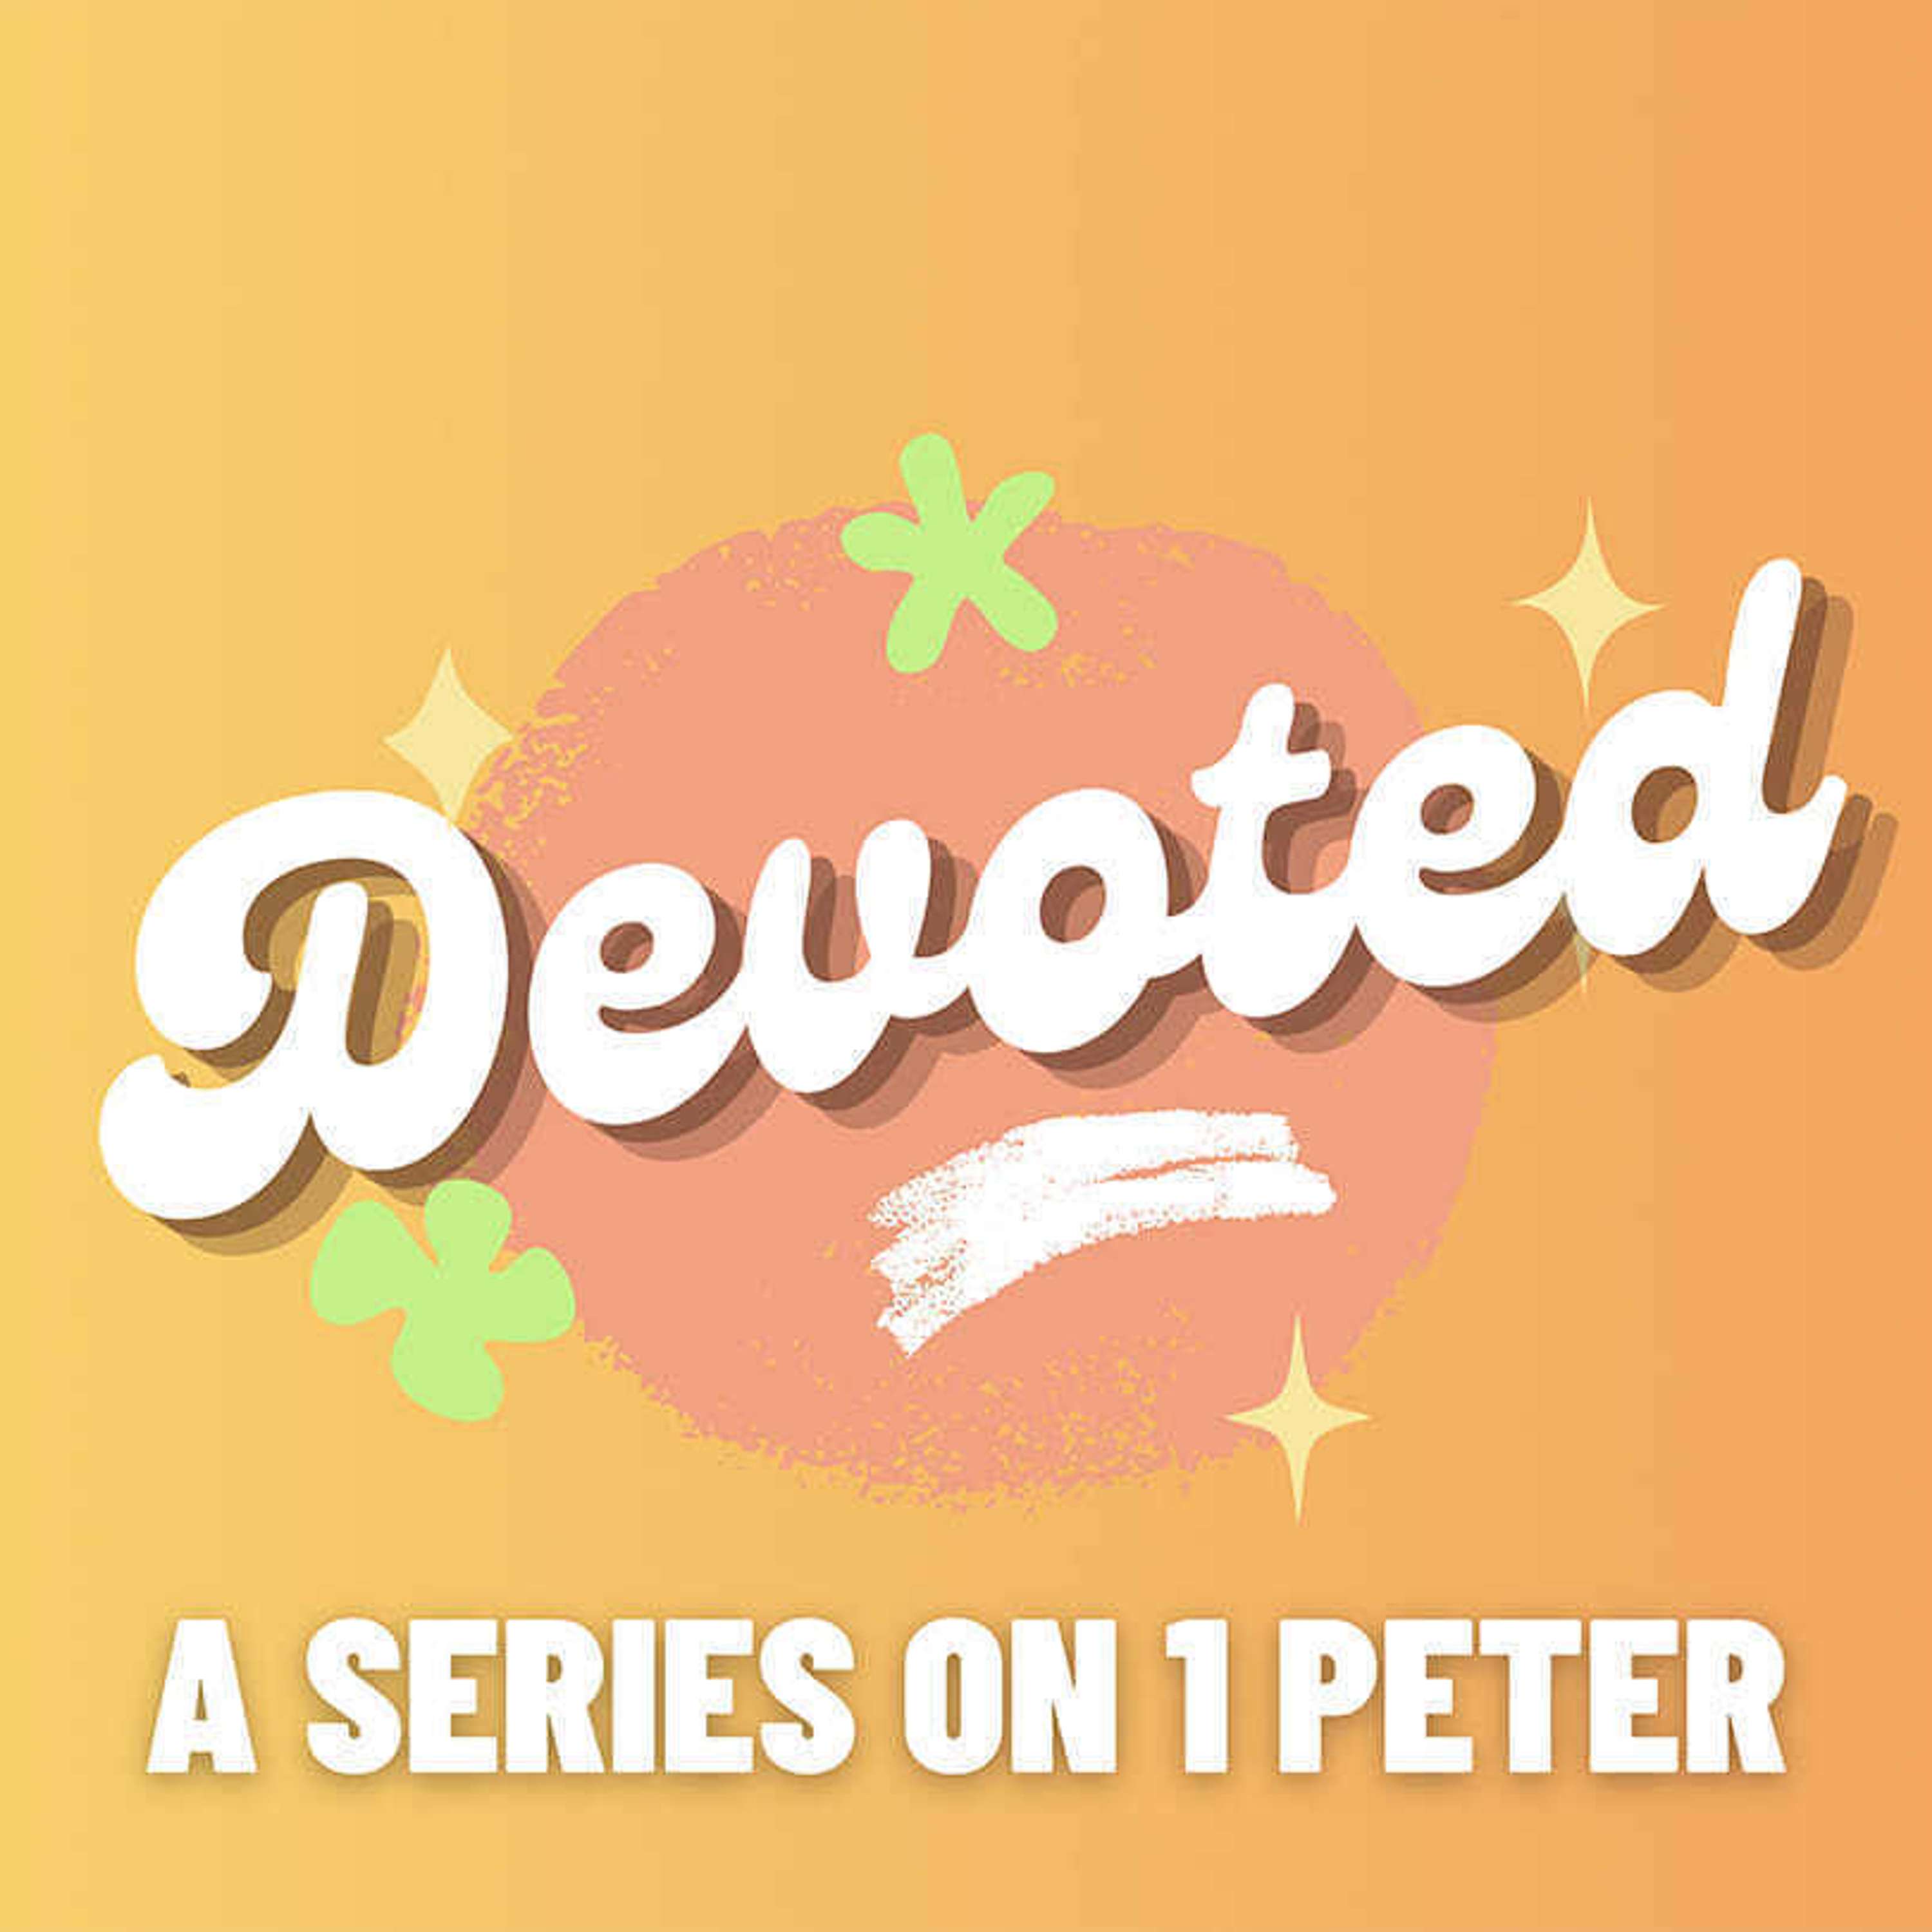 Devoted - 1 Peter 3: Led by the Spirit